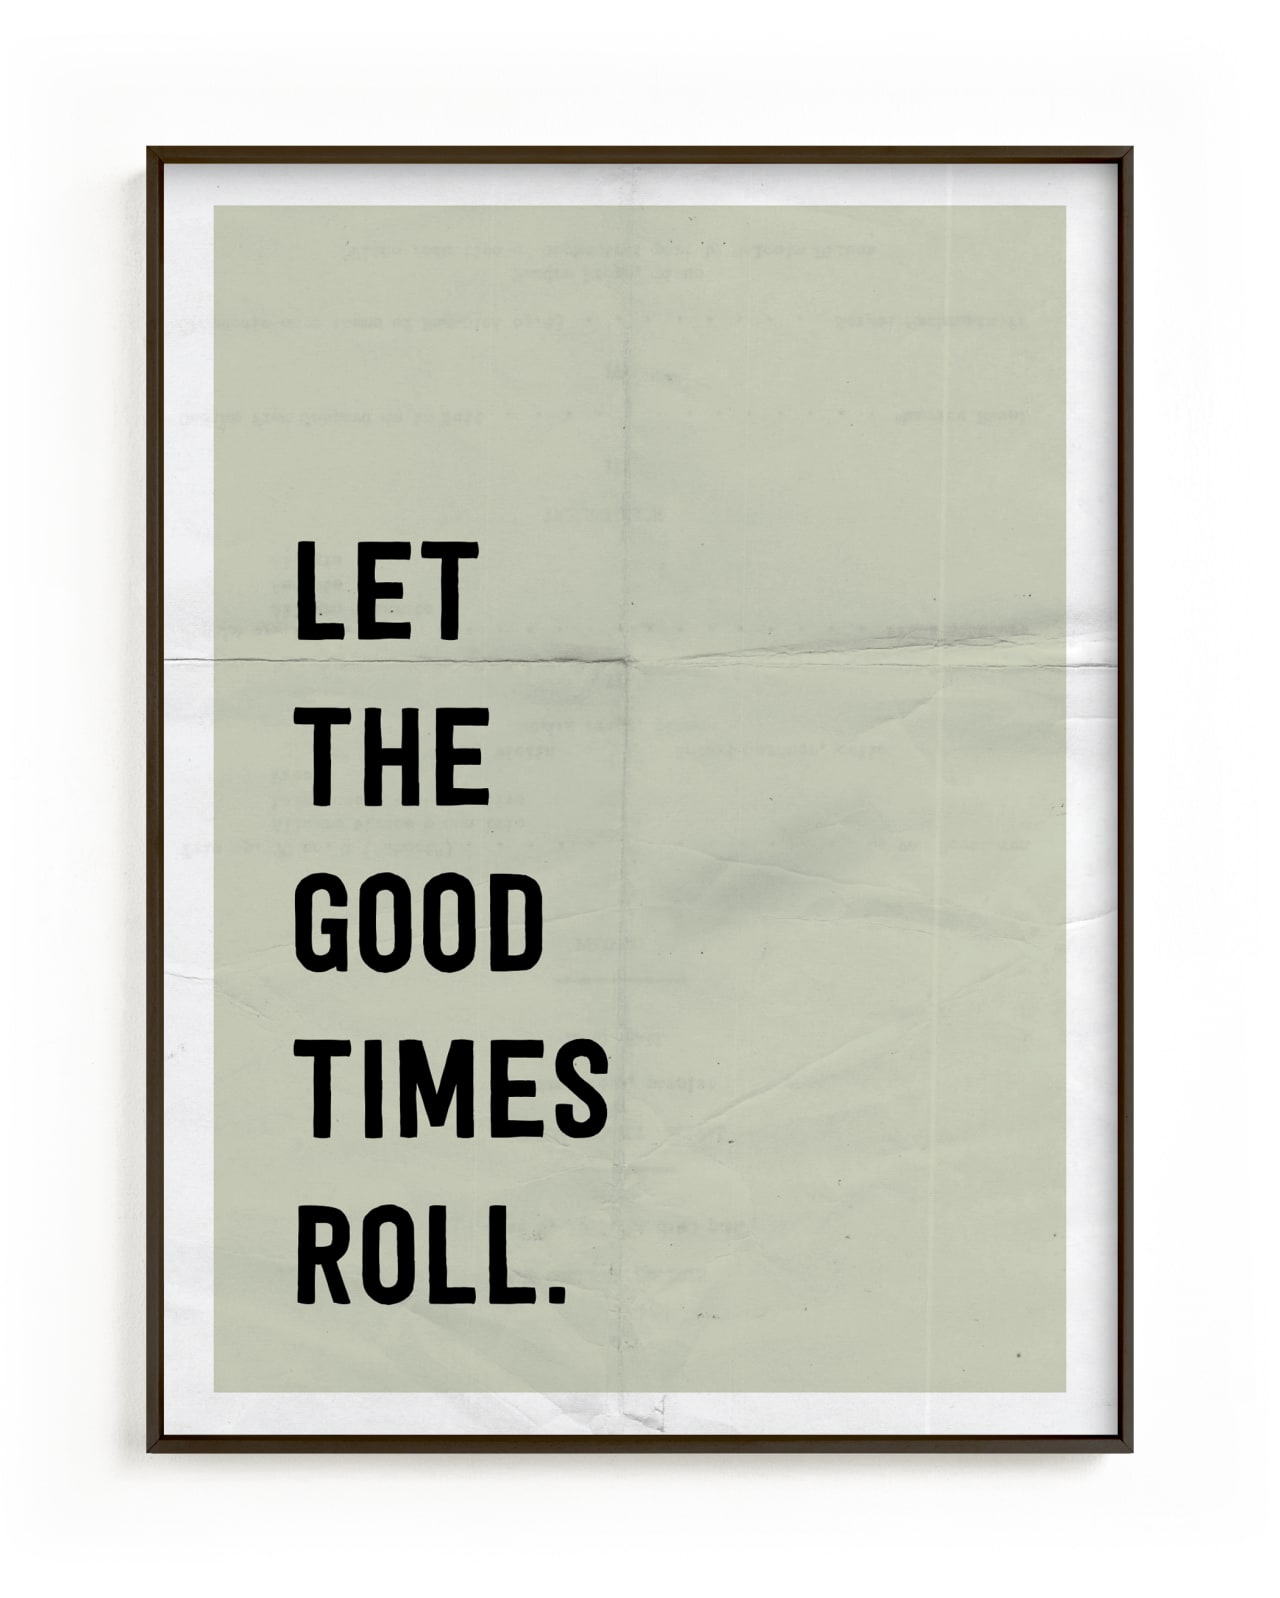 Let the Good Times Roll by Morgan Kendall